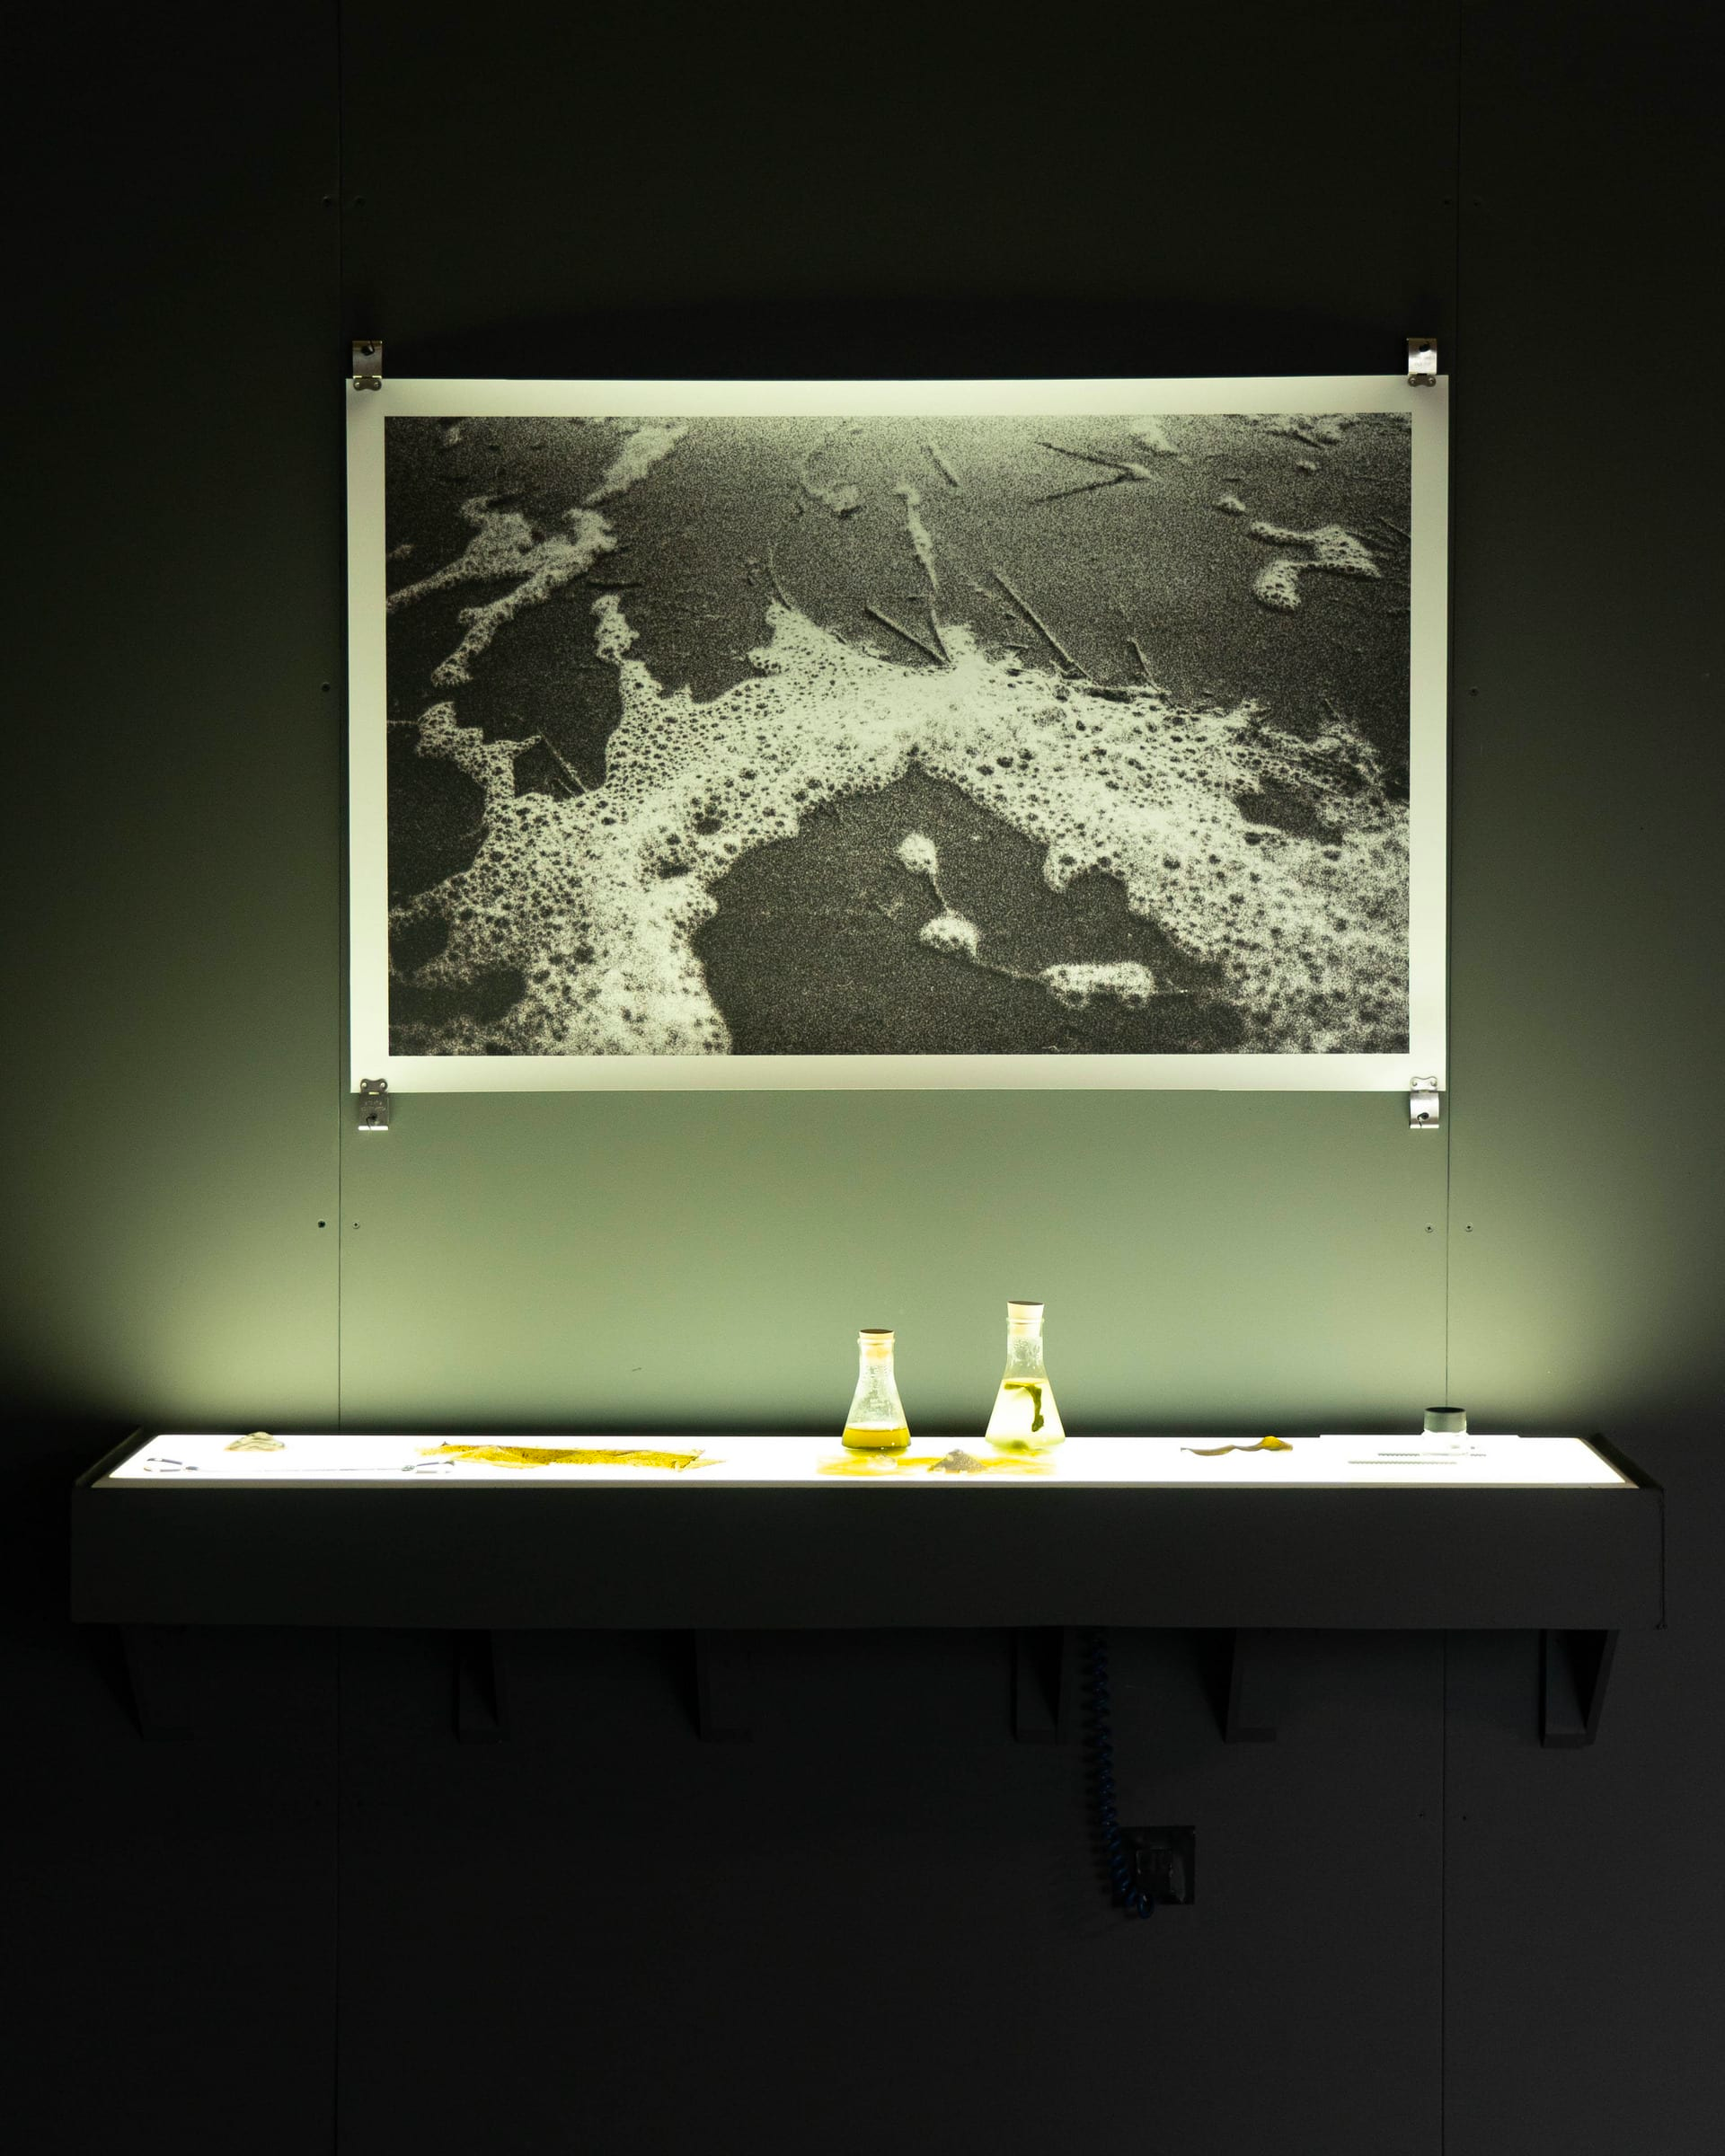 Image of what looks like a black and white photograph of sea foam on sand, hung on a wall above an illuminated shelf, which holds a couple of glass vase-like objects.